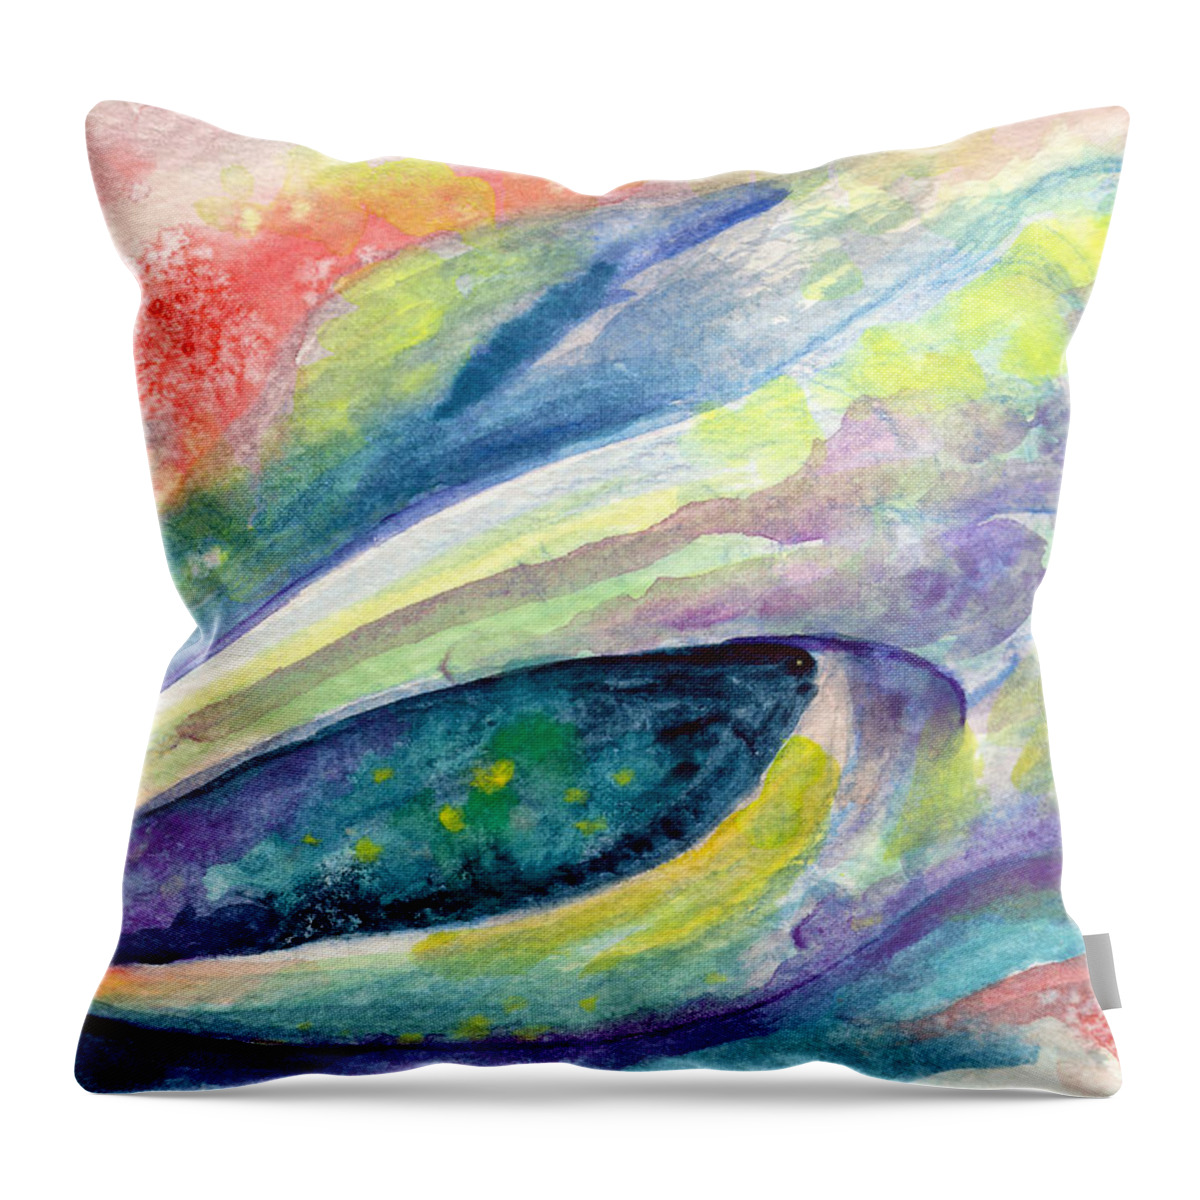 Giant Land Crab Throw Pillow featuring the painting Pinch of Crab by Ashley Kujan